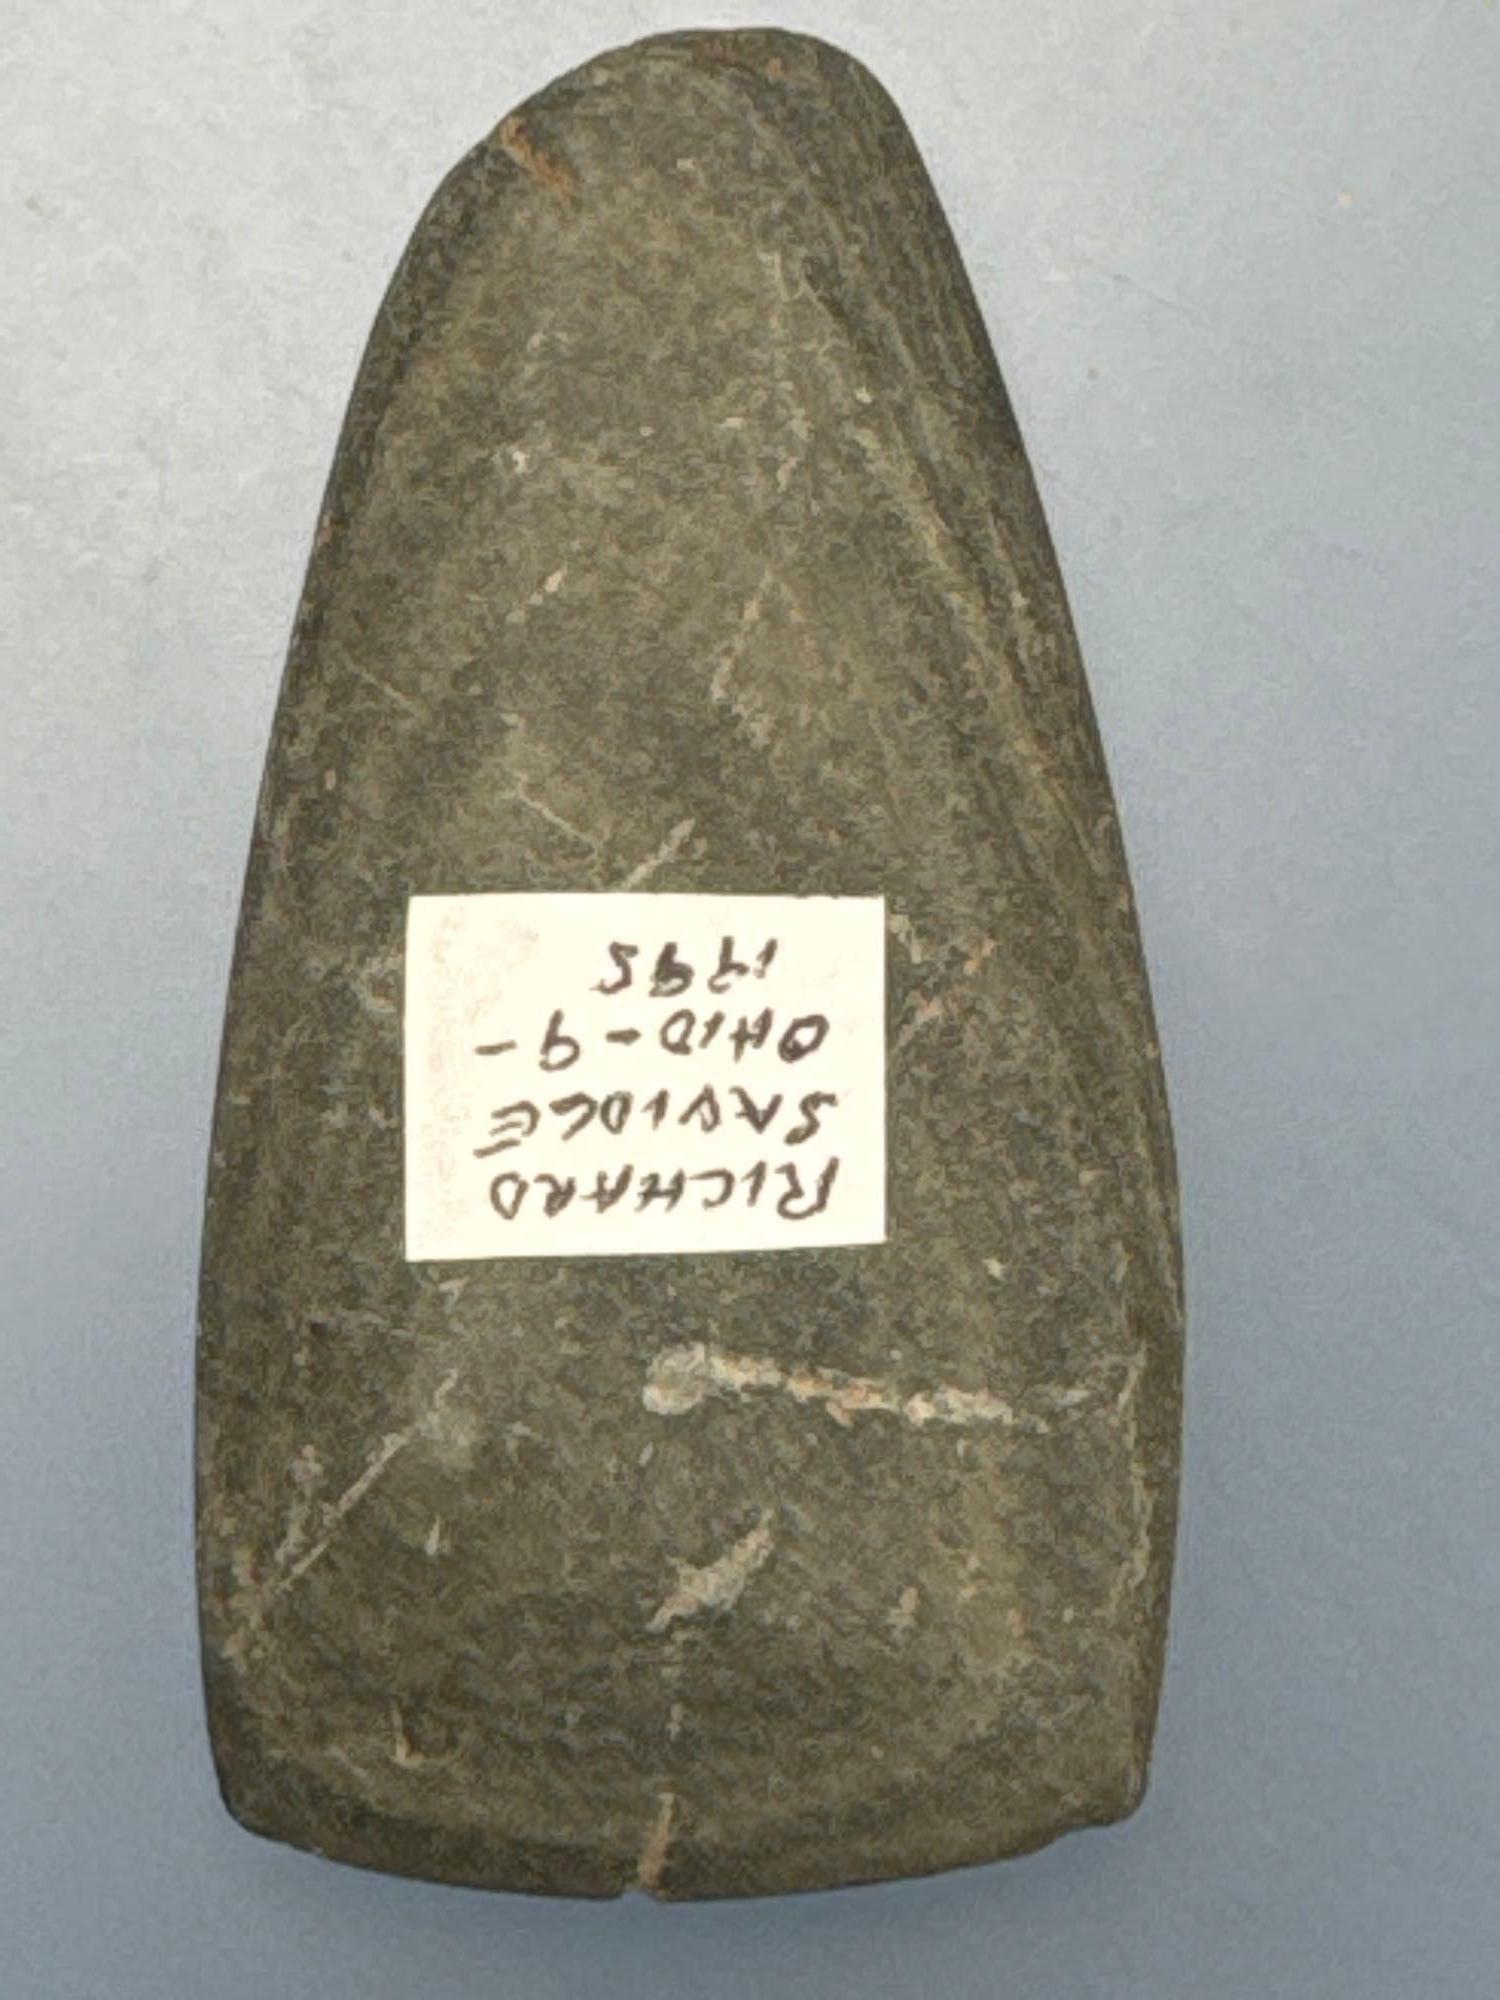 2 1/2" Miniature Banded Slate Celt, Found in Ohio, Purchased from Dick Savidge in 1998, Ex: Walt Pod